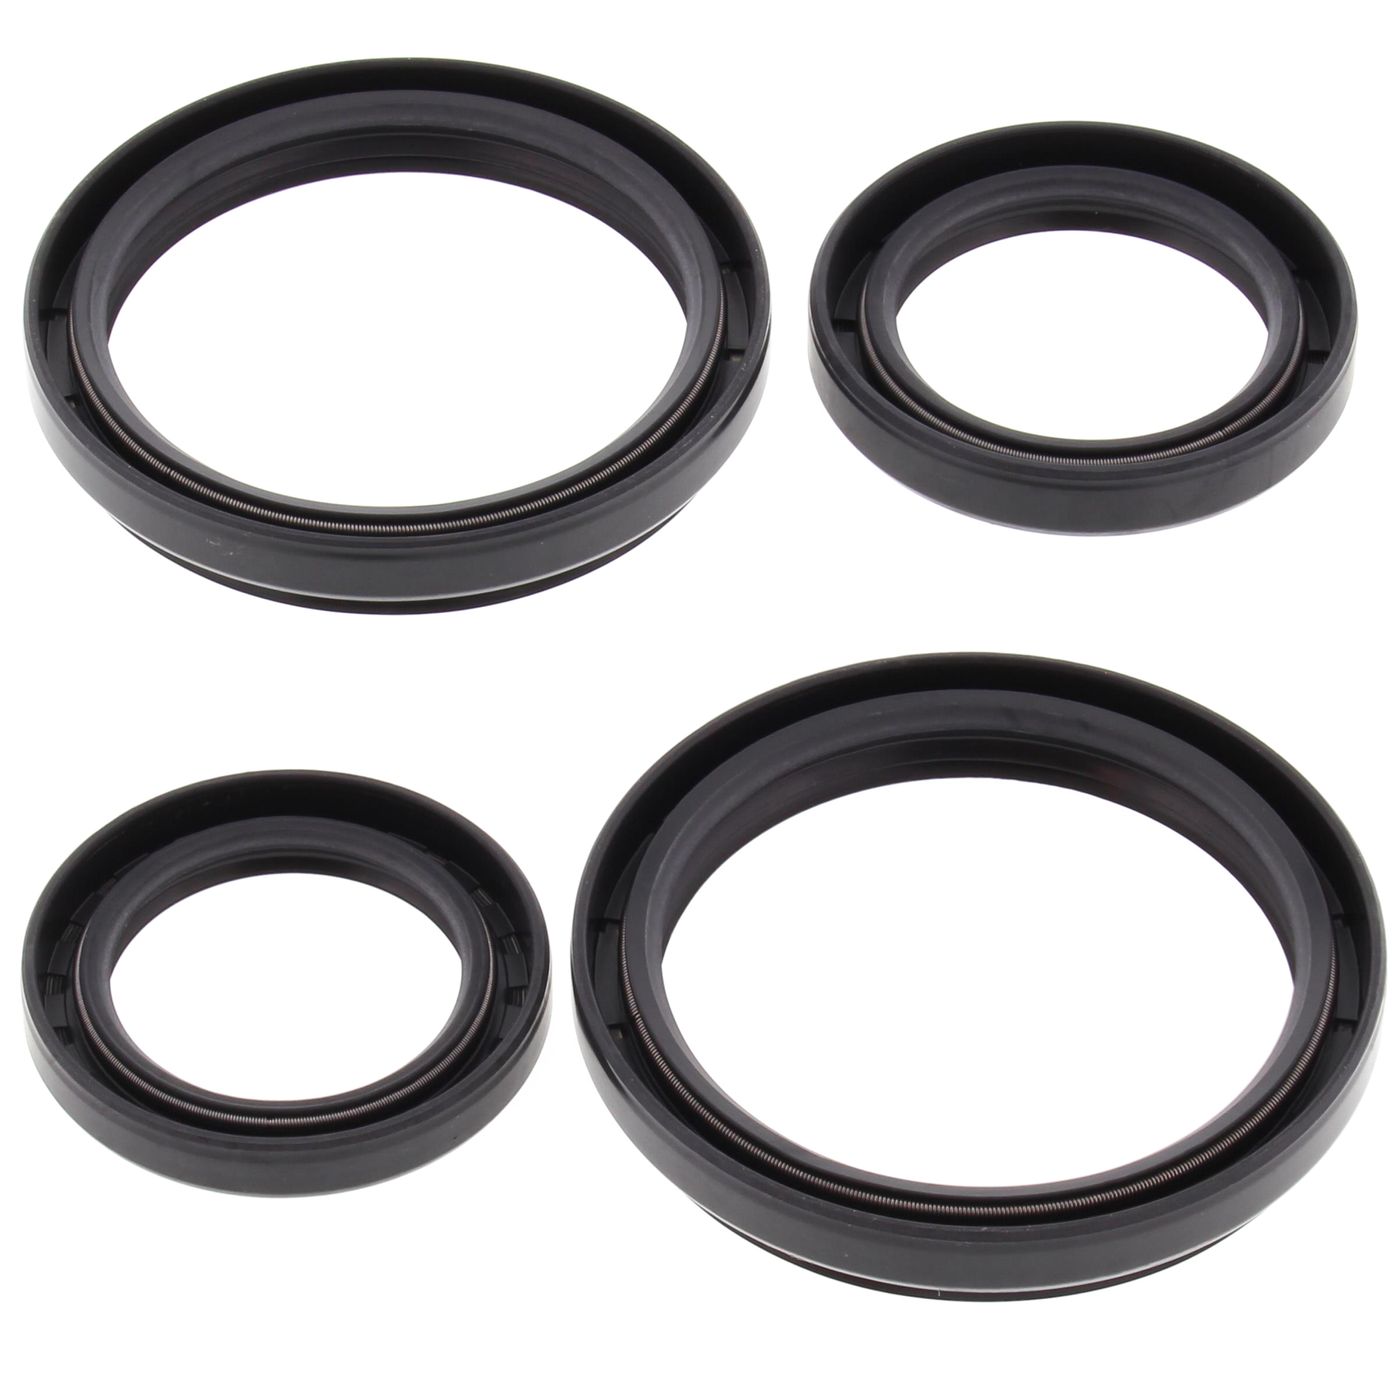 Wrp Diff Seal Kits - WRP252050-5 image